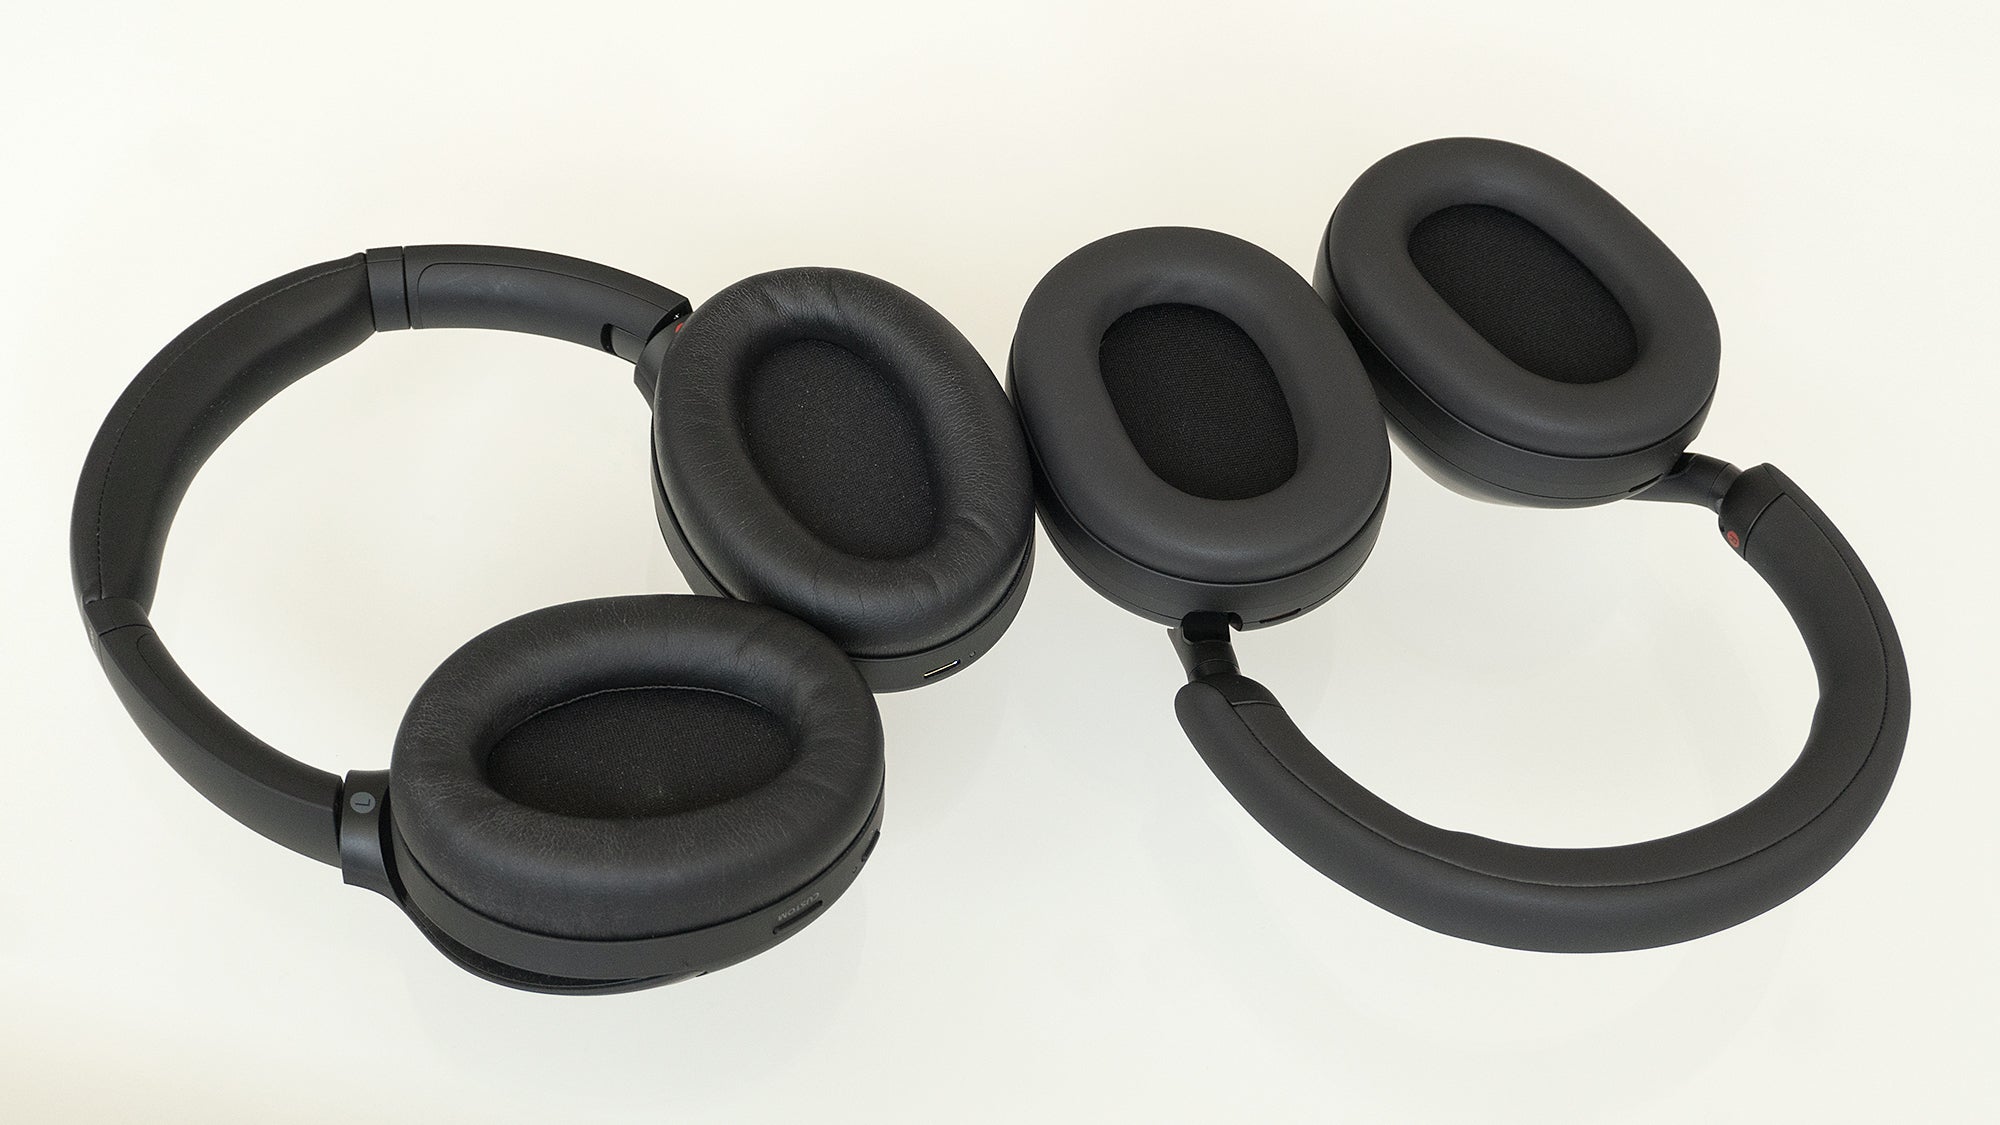 Sony has also increased the size of the earcups with the WH-1000XM5 (right) over the WH-1000XM4 (left) making them even more comfortable to wear. (Photo: Andrew Liszewski - Gizmodo)